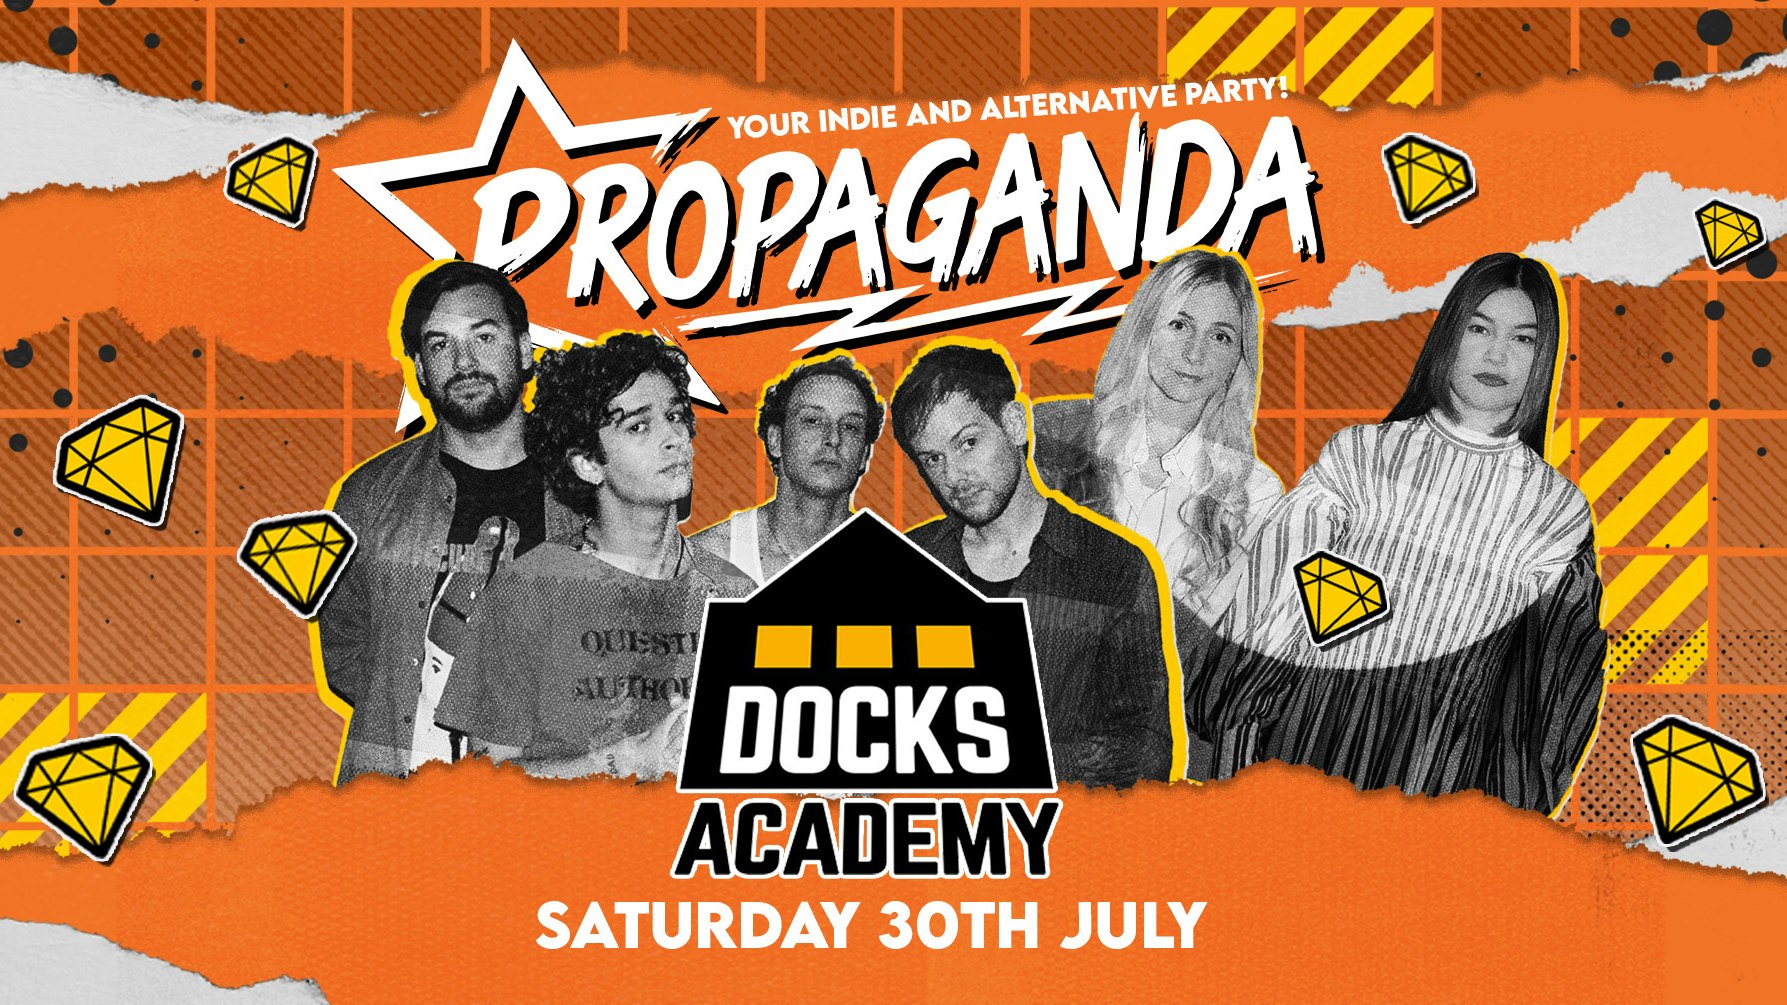 Propaganda – Your Indie and Alternative Party!